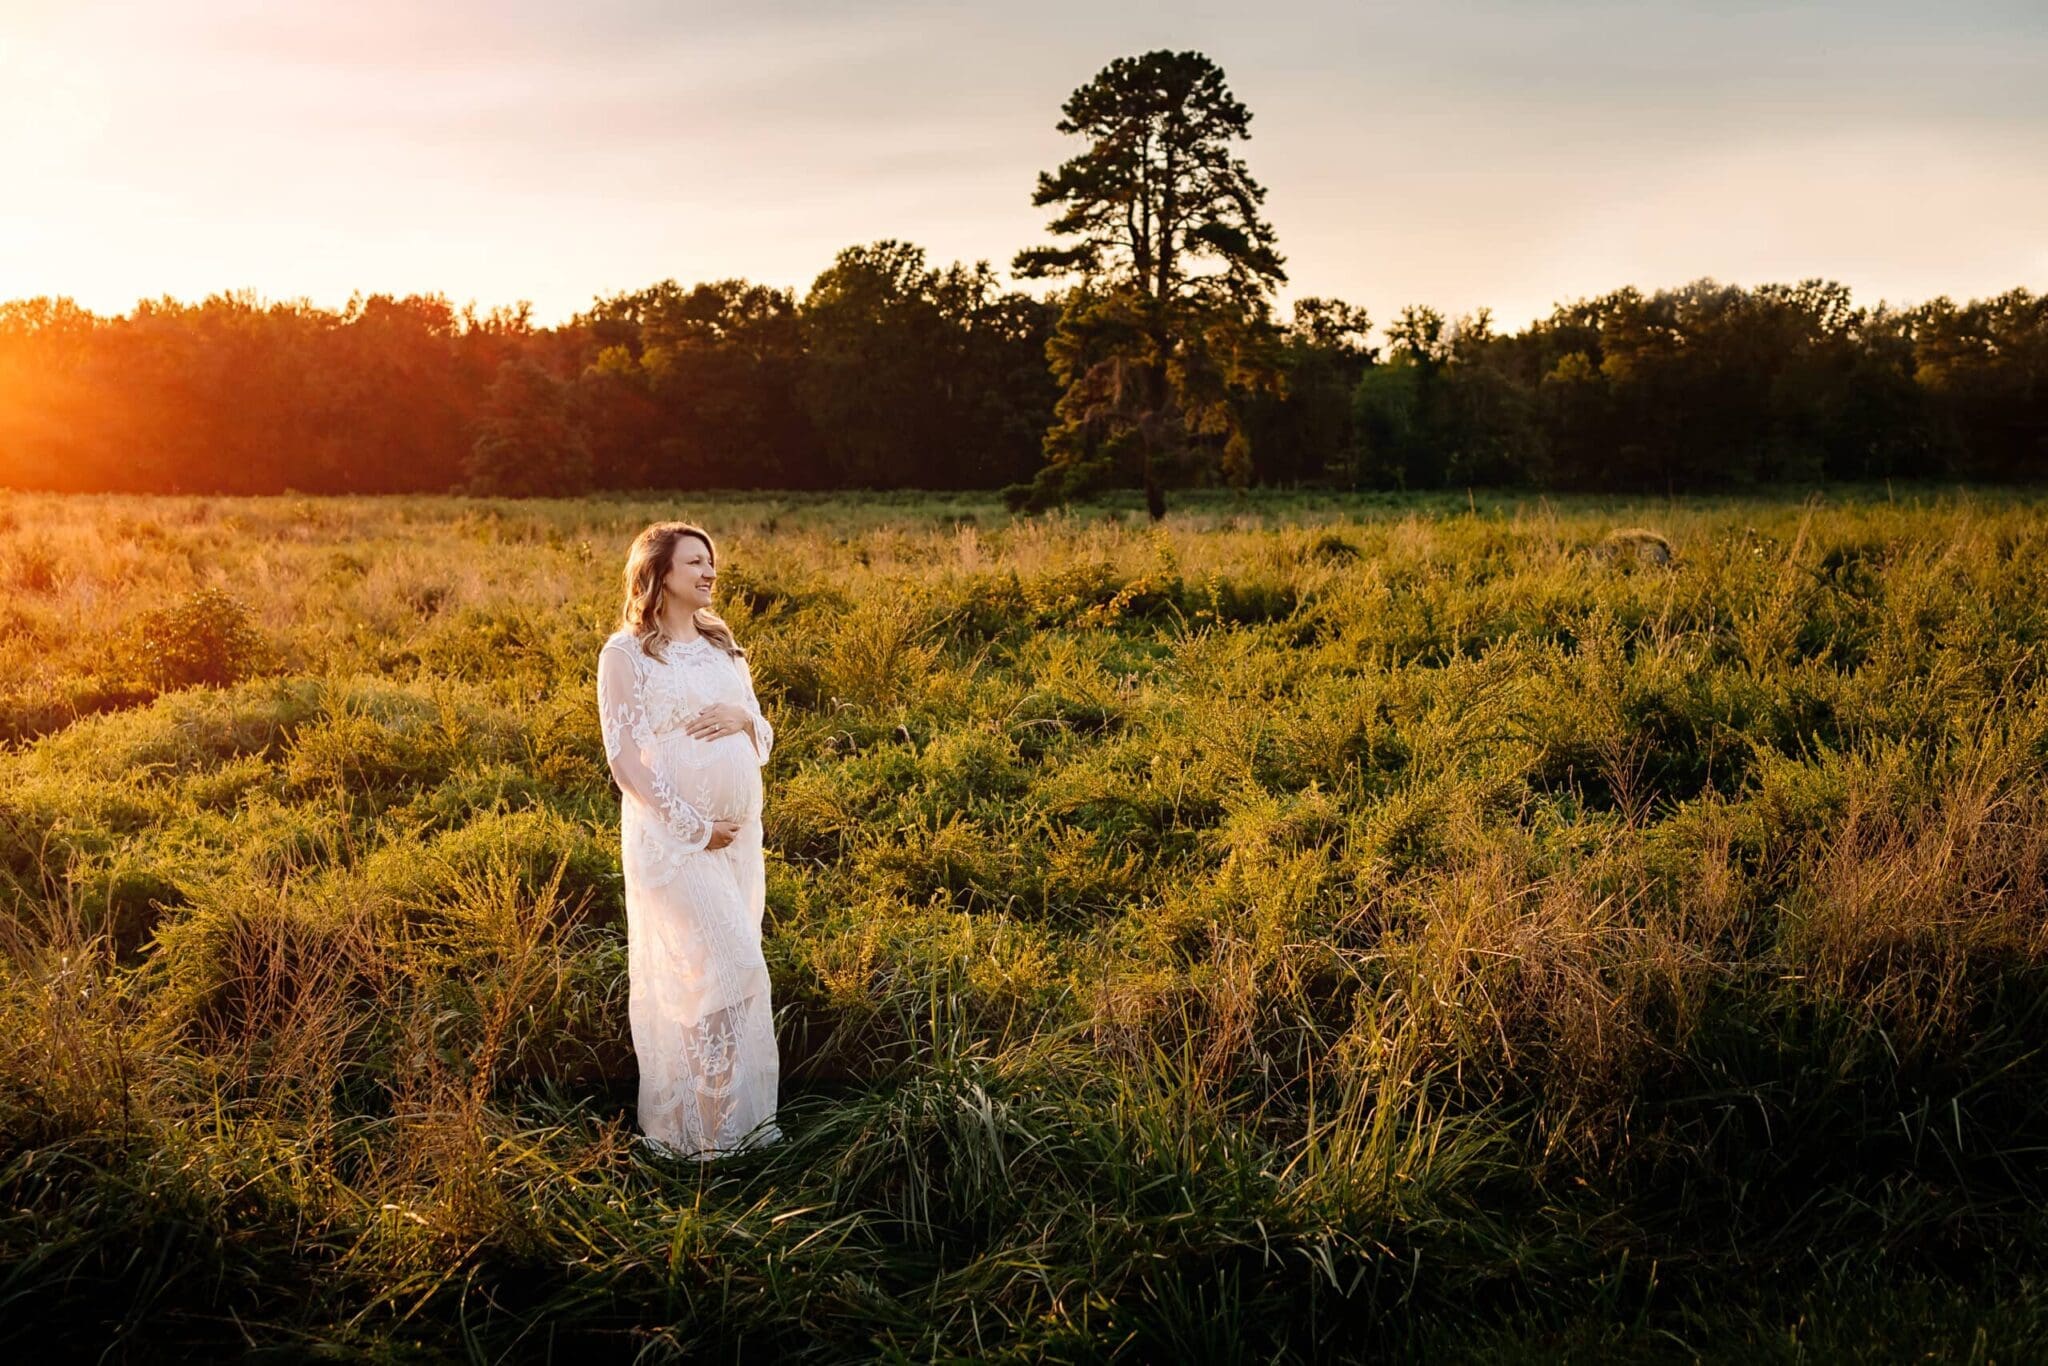 Pregnant mother posing in a grassy field at sunset.